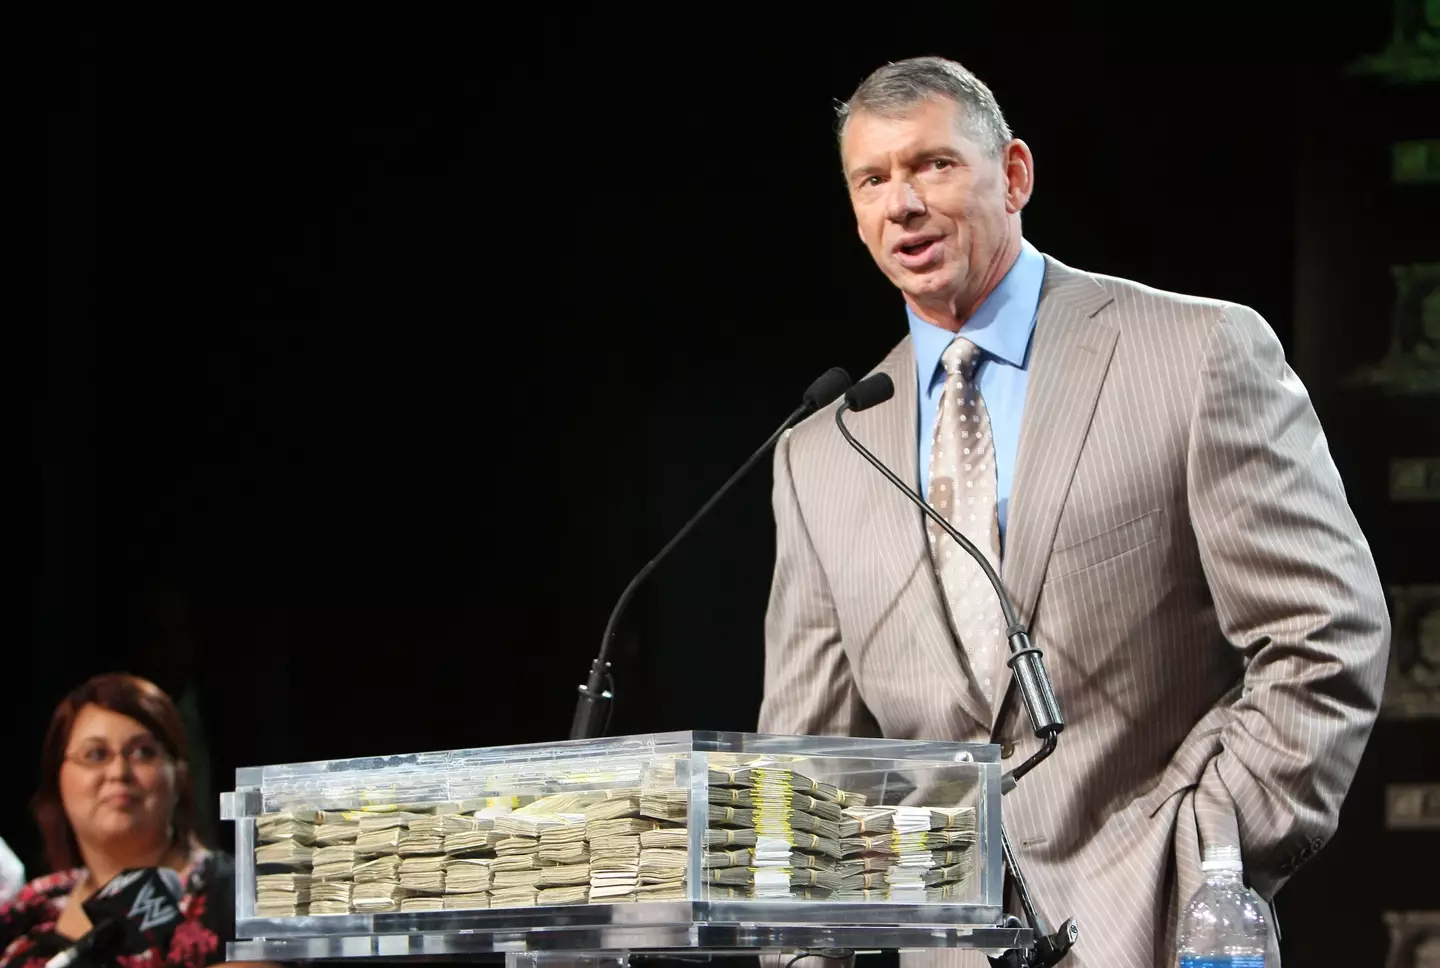 UFC's parent company will have the larger stake, but WWE boss Vince McMahon will still have a role to play.